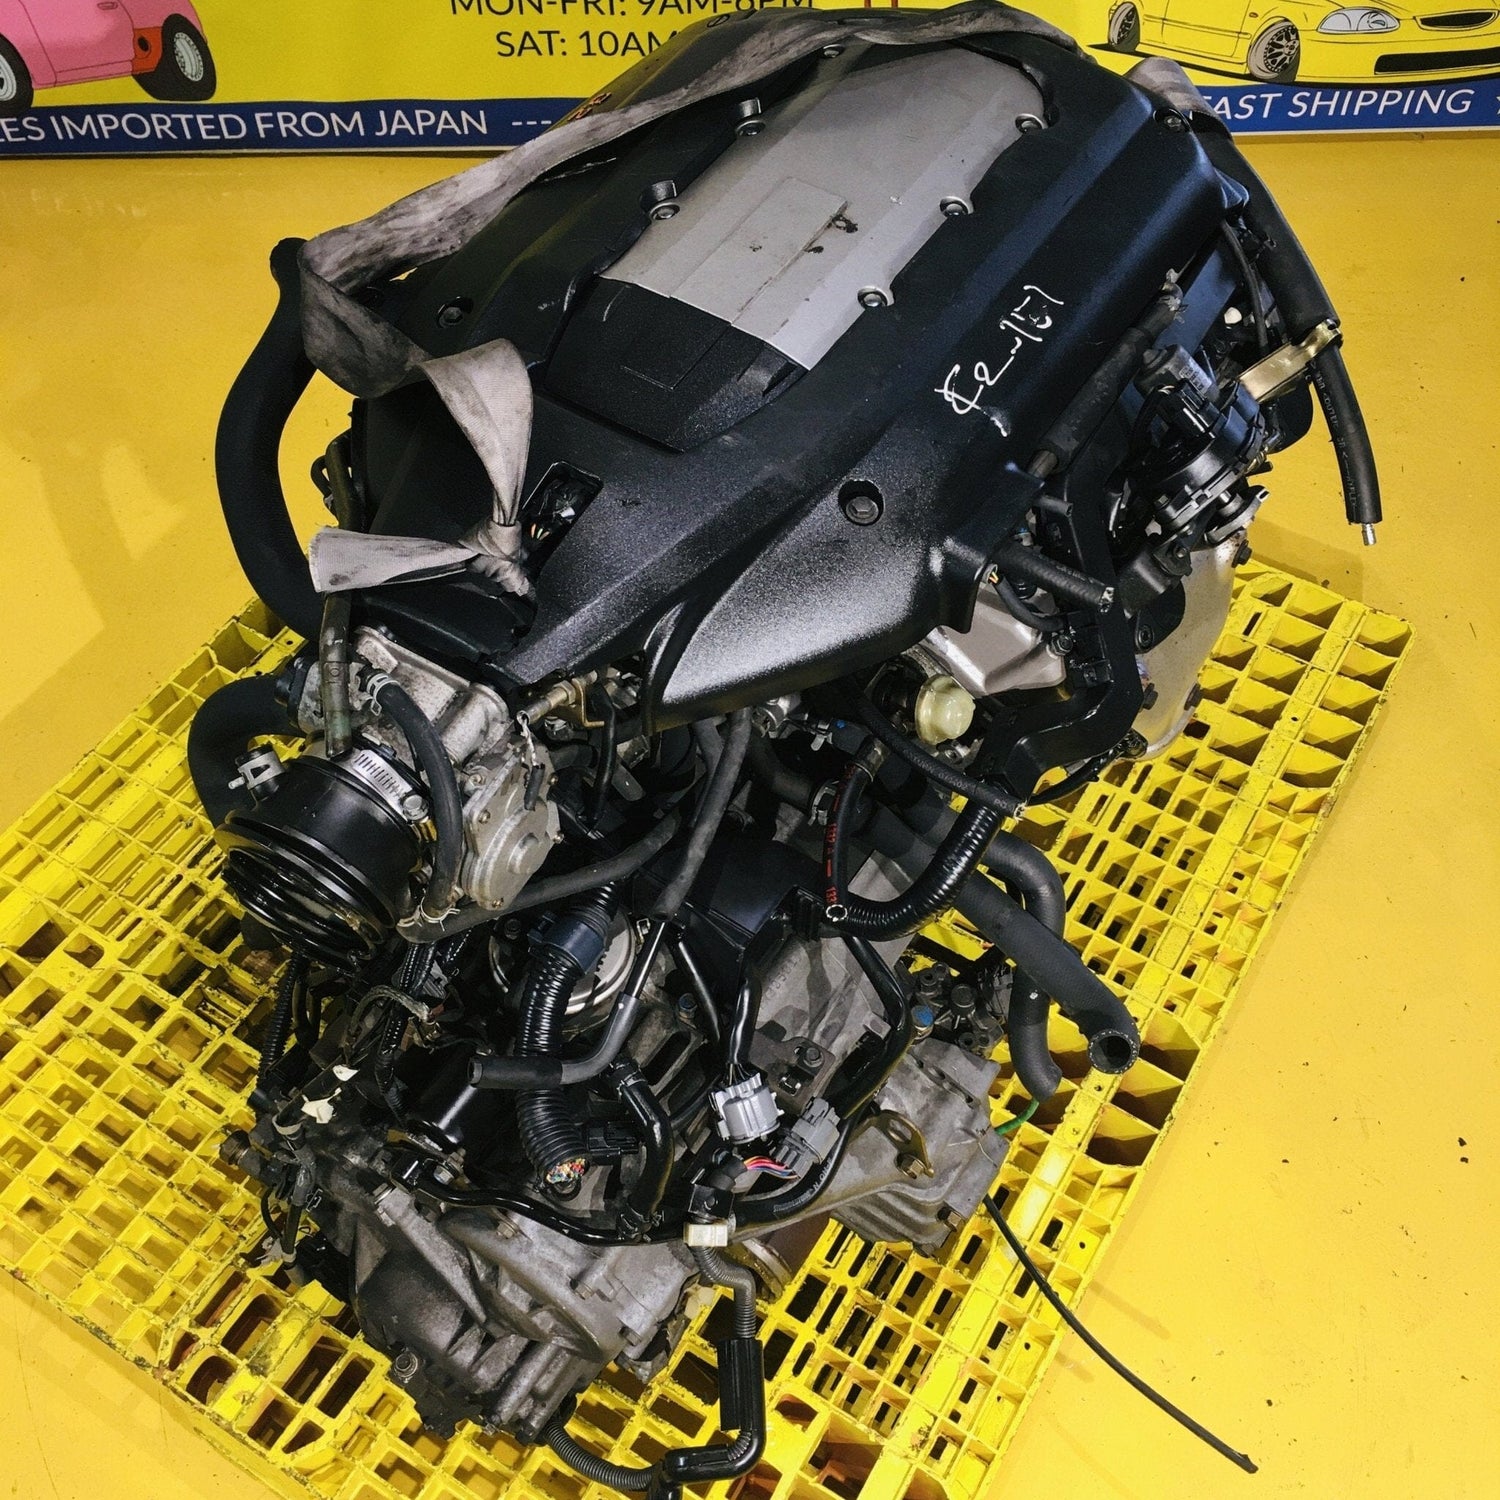 Honda Acura Tl (2001-2003) 3.2l Jdm Complete Engine With 4 Speed Auto Transmission Swap J32a